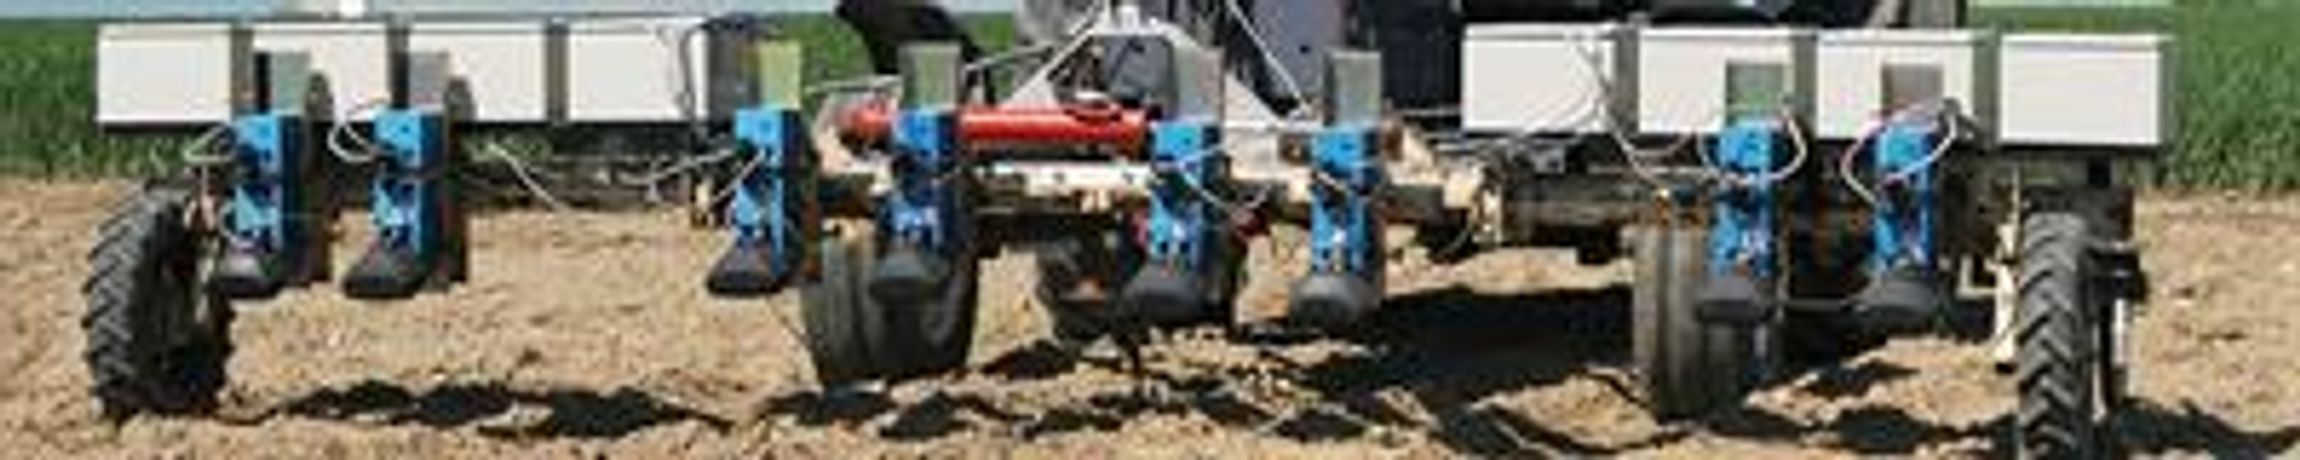 Field Vision System for Plant Breeders-1